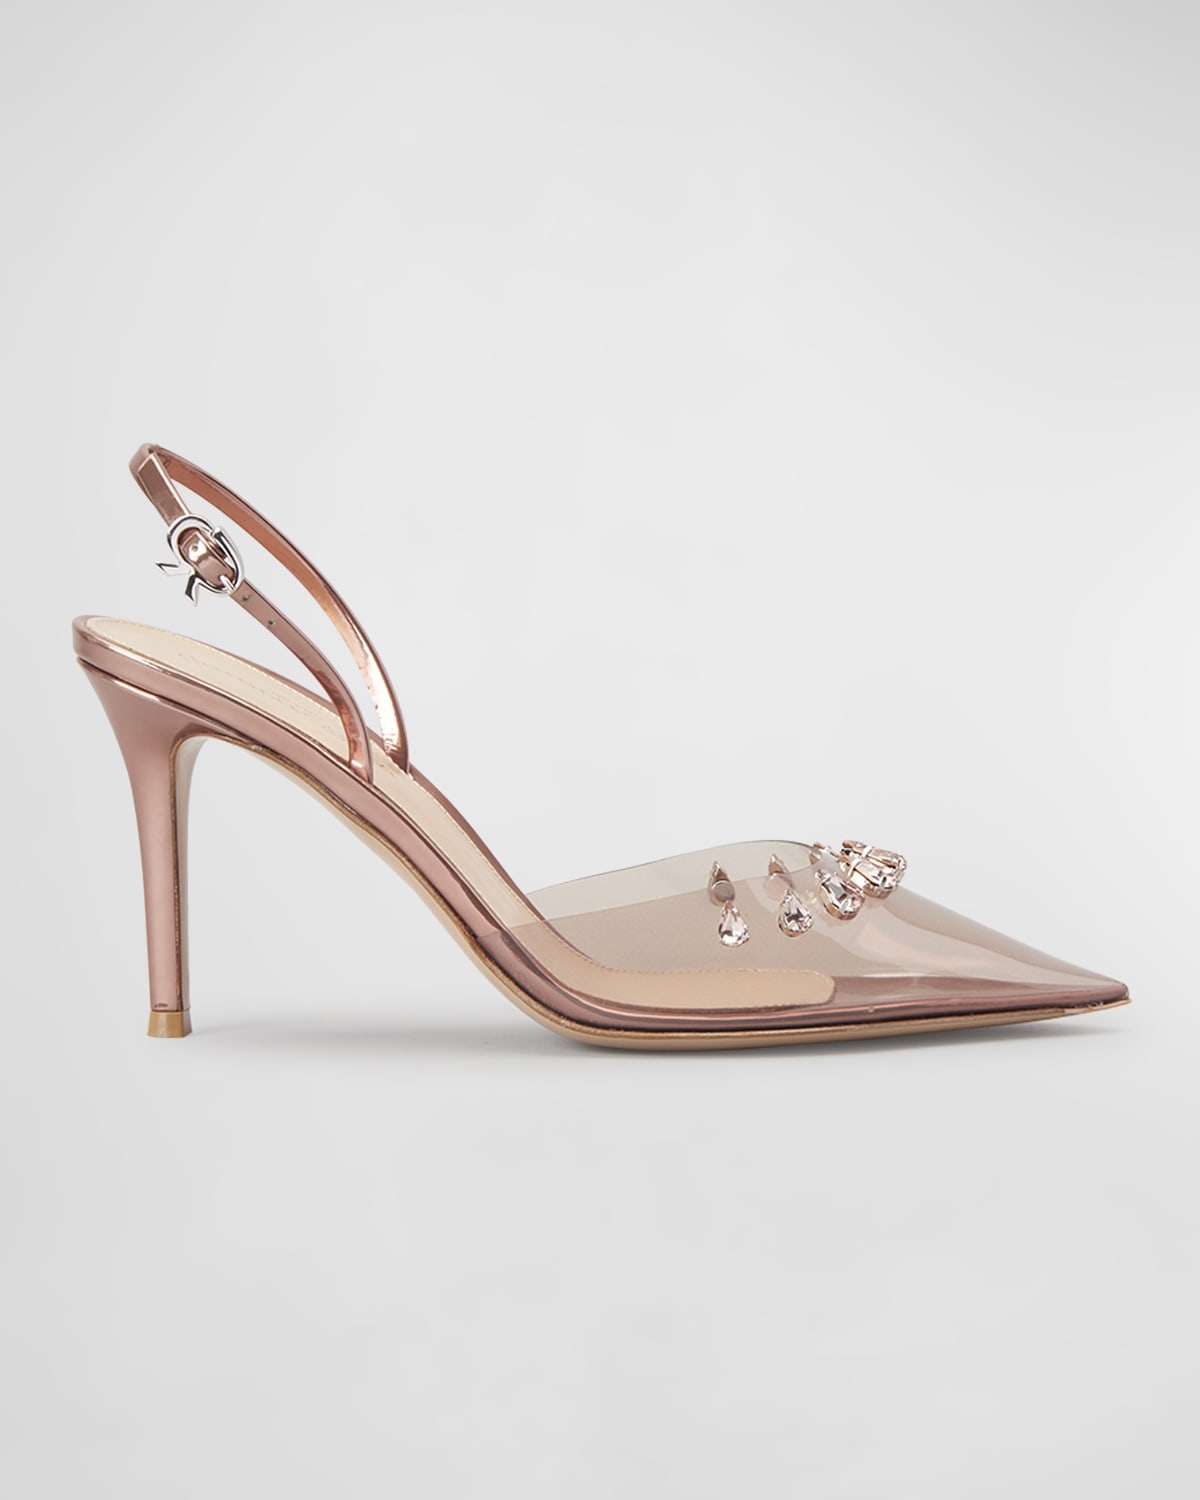 Gianvito Rossi Leather Point-Toe Slingback Pumps | Neiman Marcus